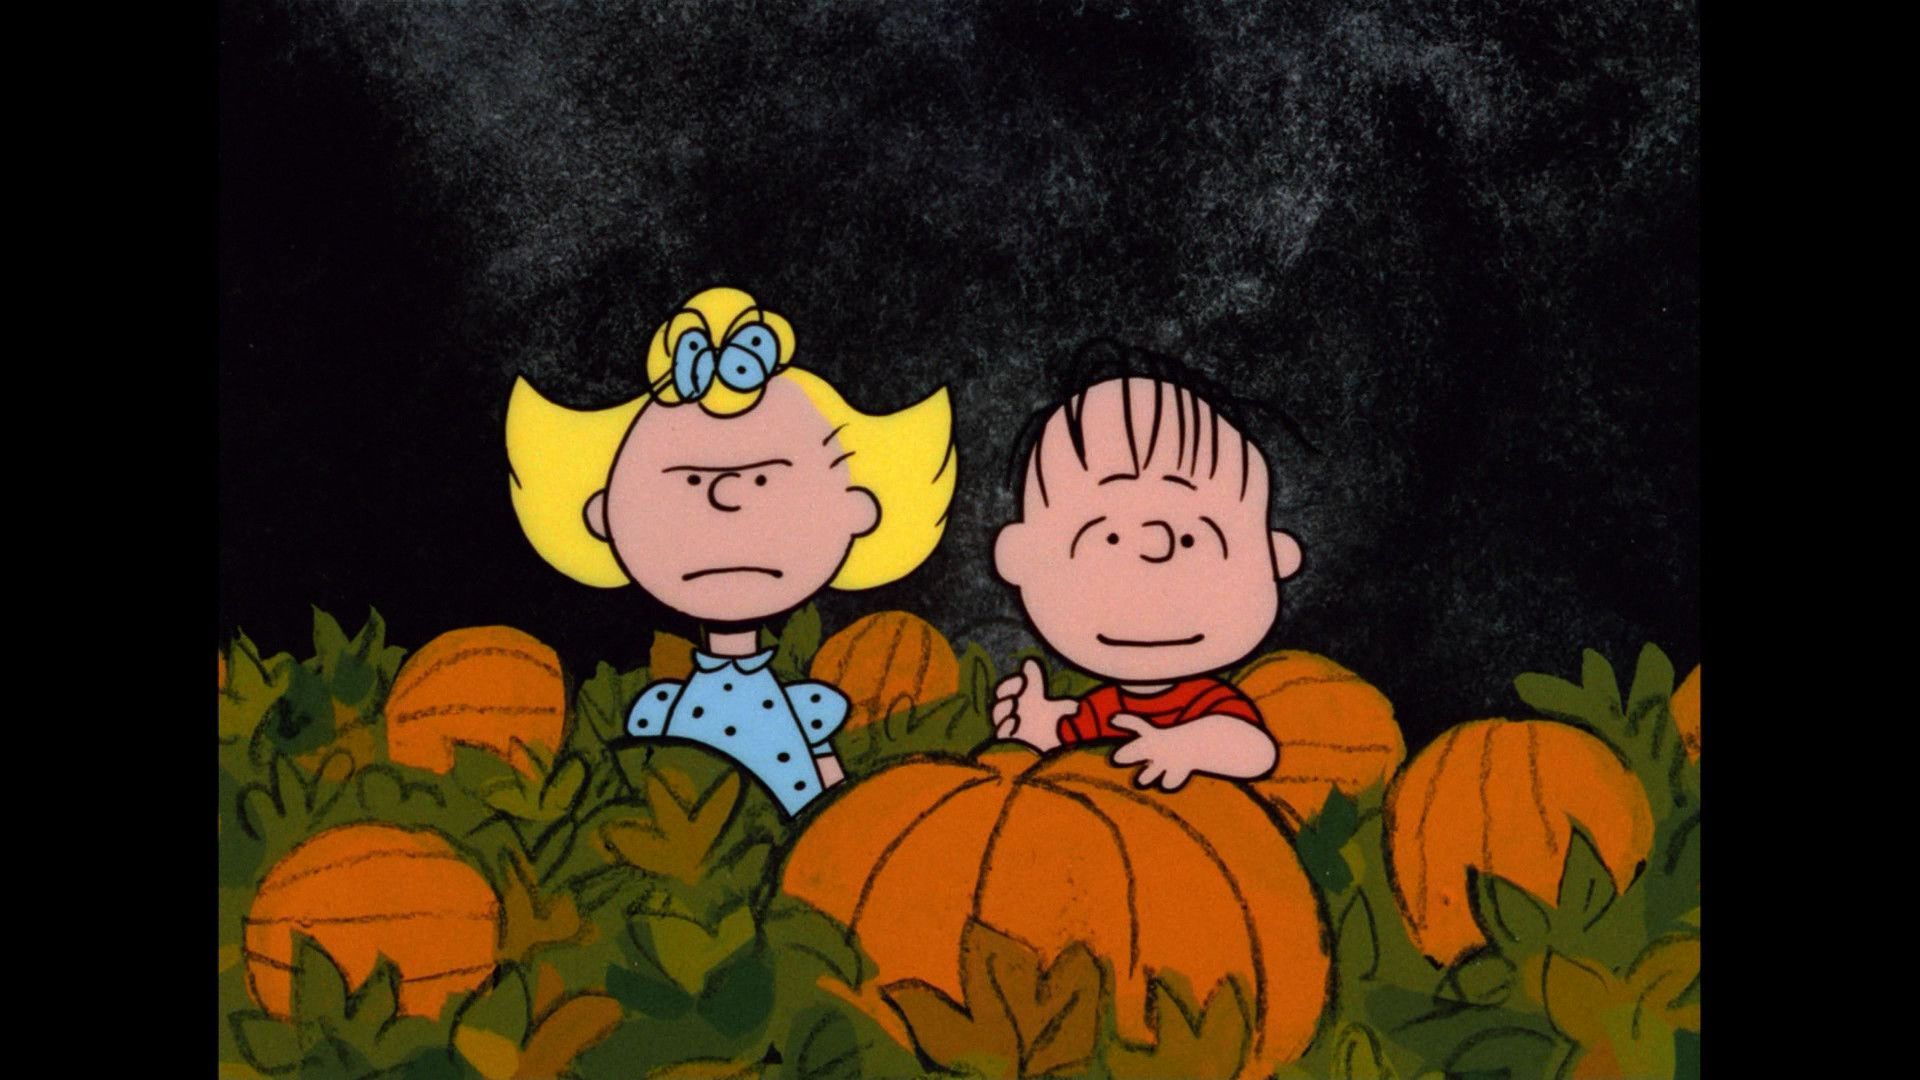 Charlie Brown and Sally in the pumpkin patch. - Halloween desktop, Charlie Brown